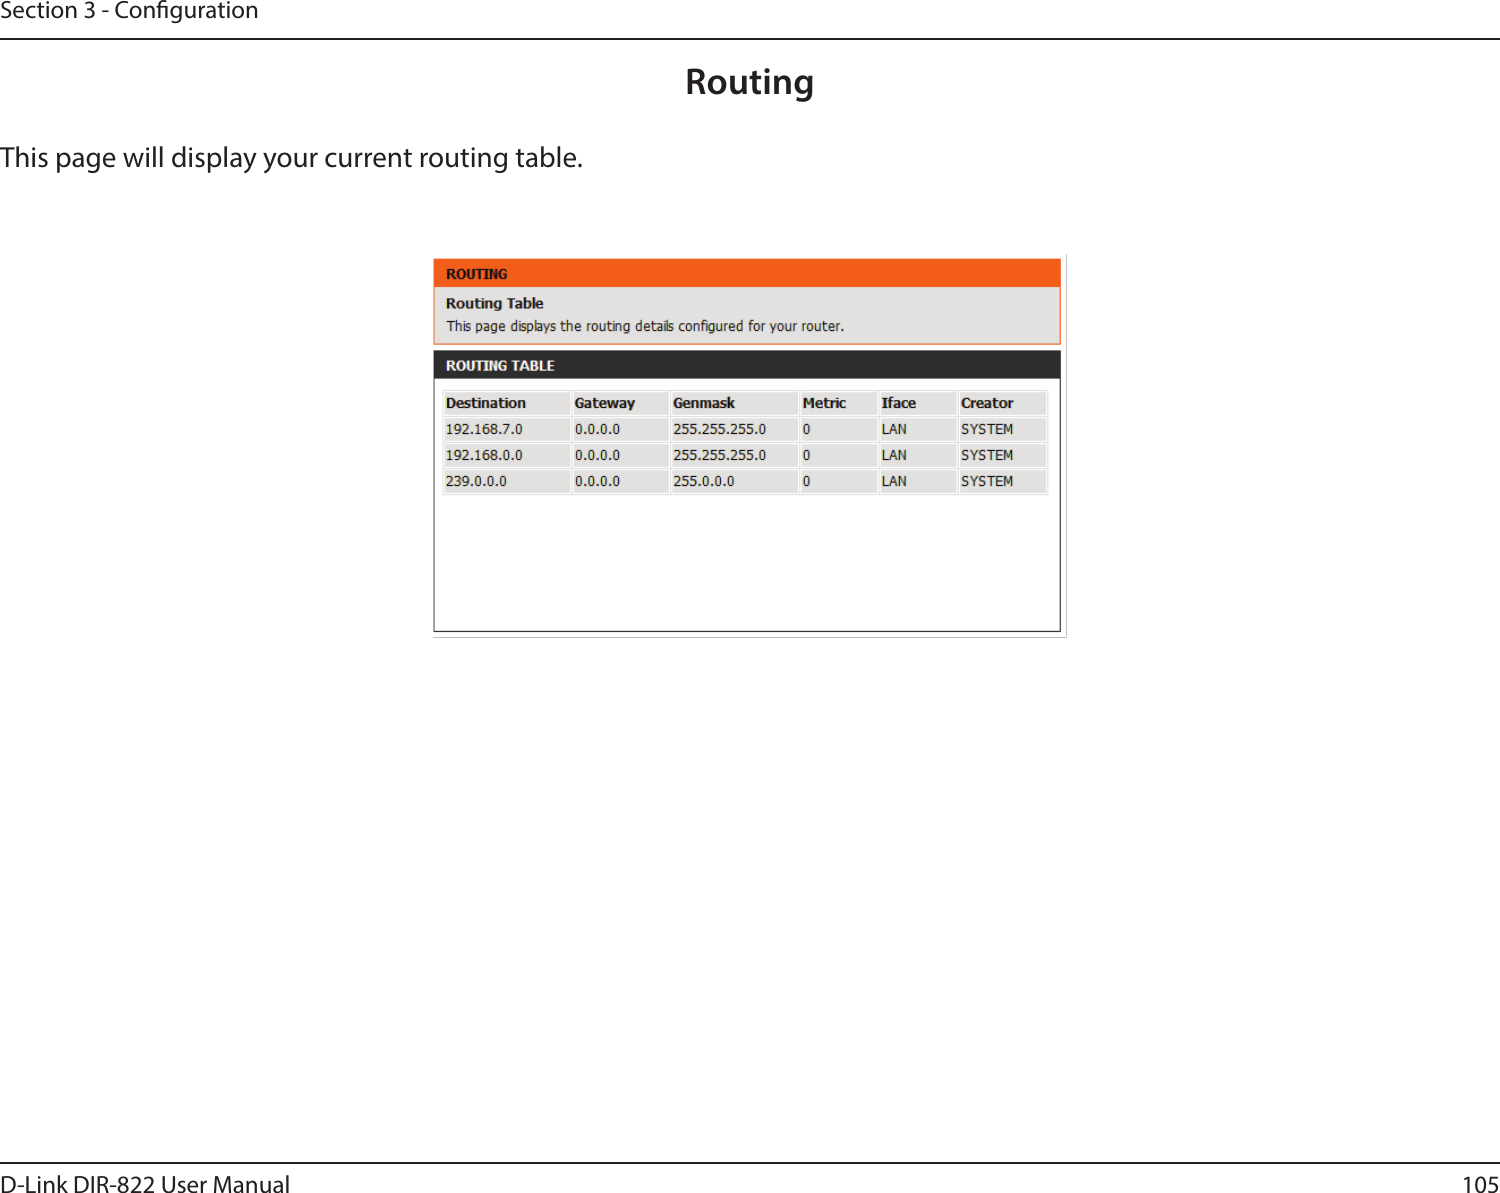 105D-Link DIR-822 User ManualSection 3 - CongurationRoutingThis page will display your current routing table.